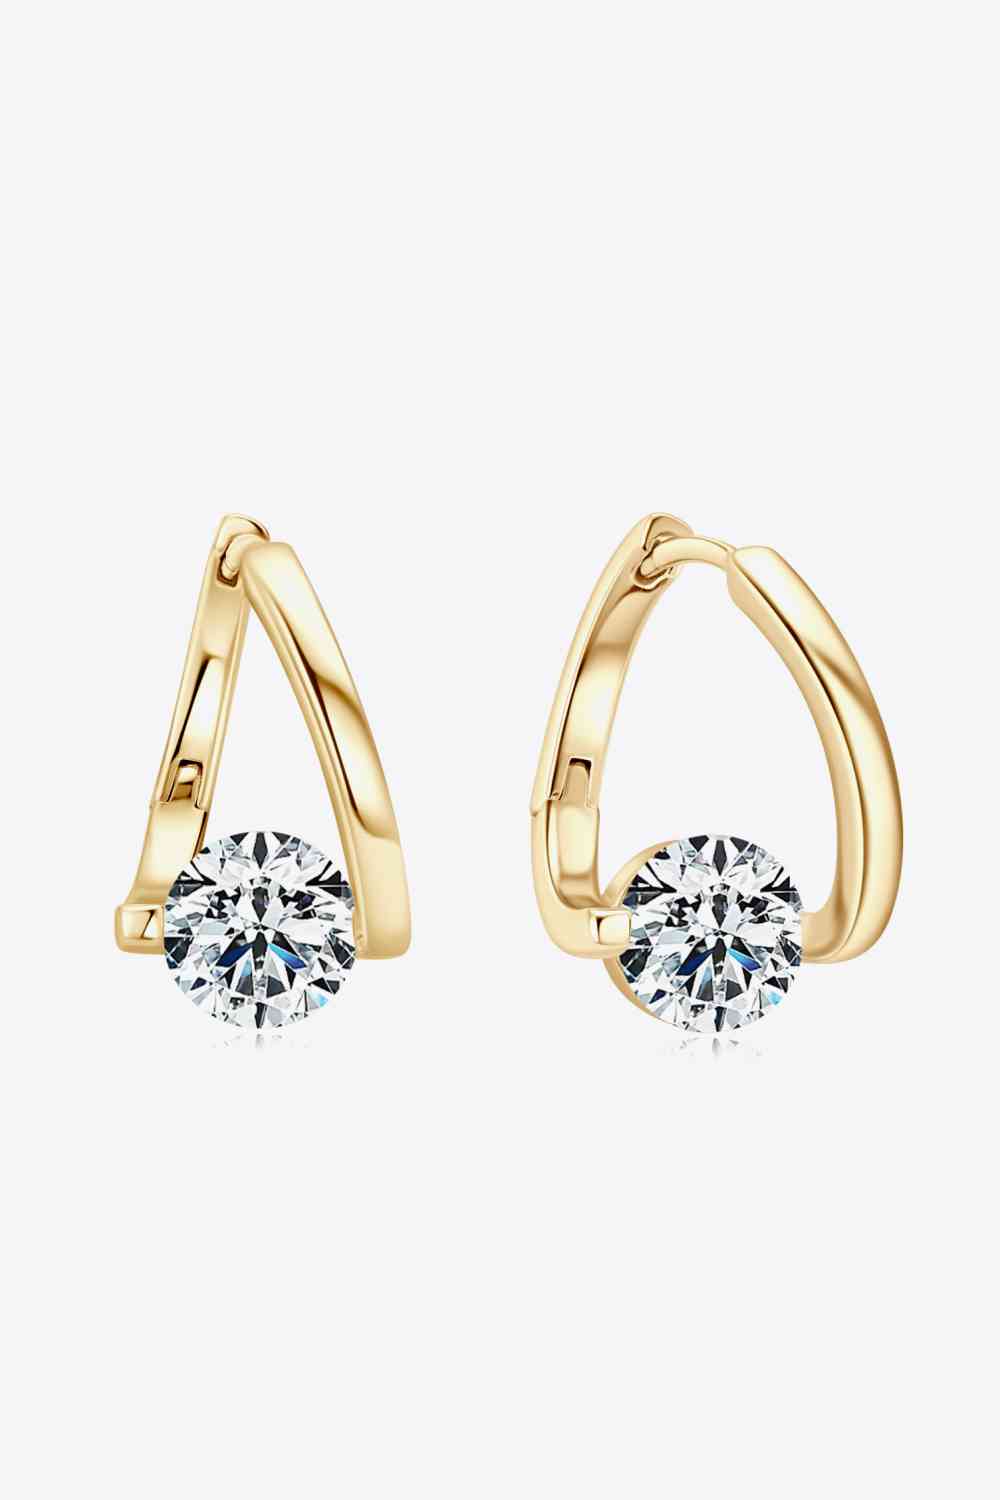 a pair of gold earrings with a diamond